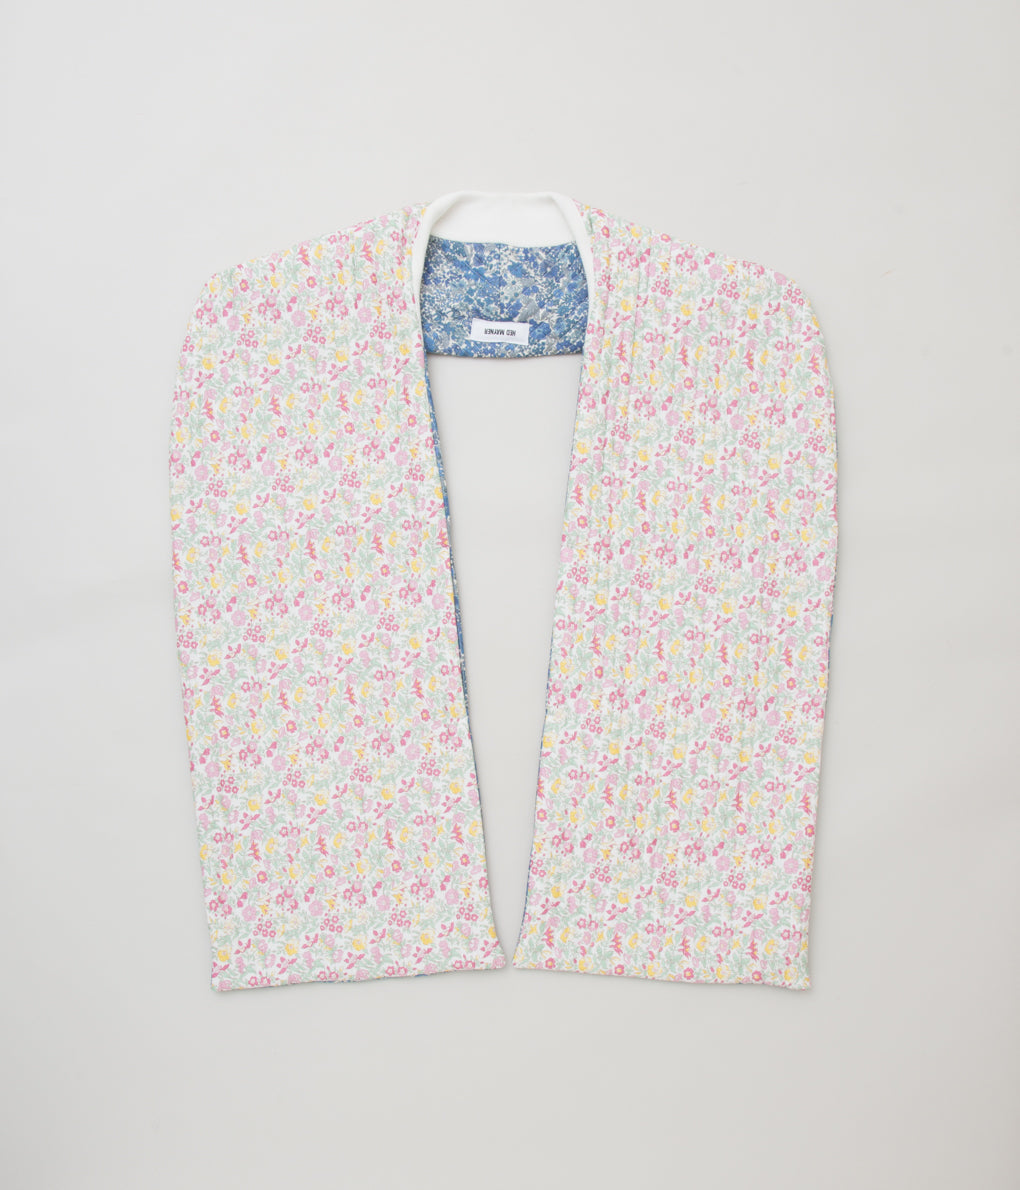 HED MAYNER "REVERSIBLE QUILTED CROPPED COAT"(LIGHT BLUE & ECRU FLOWERS)